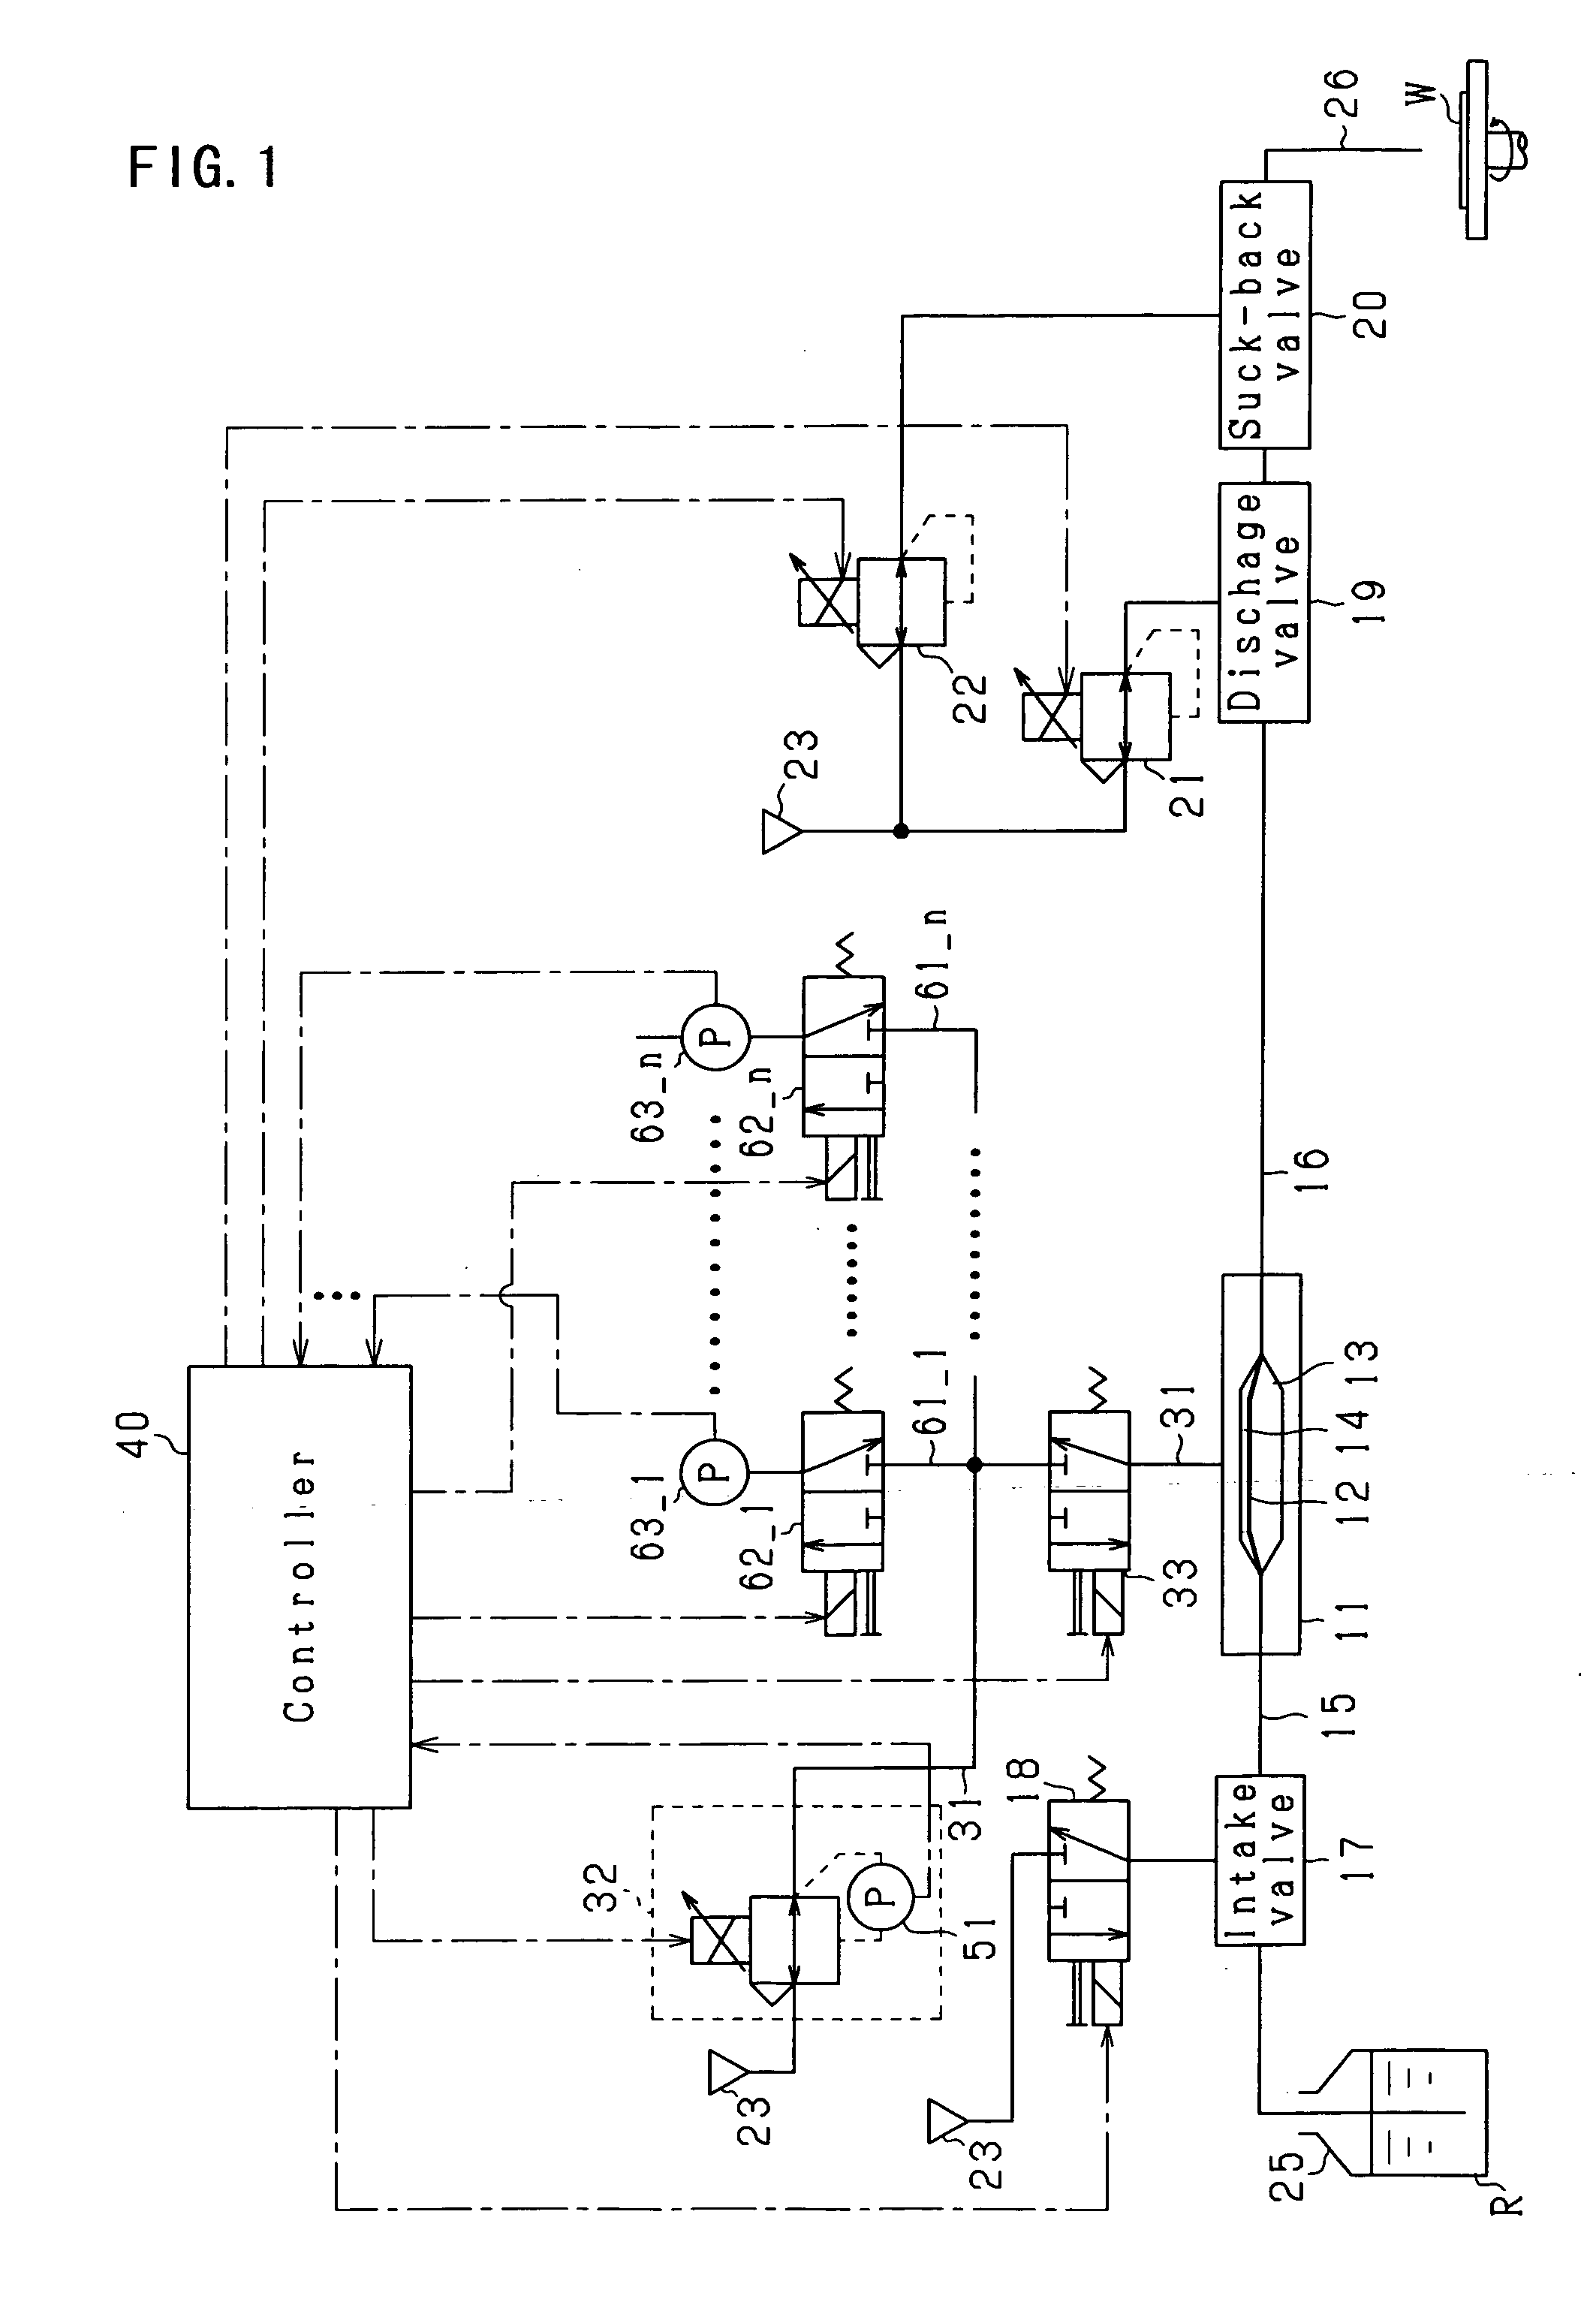 Liquid chemical supply system having a plurality of pressure detectors